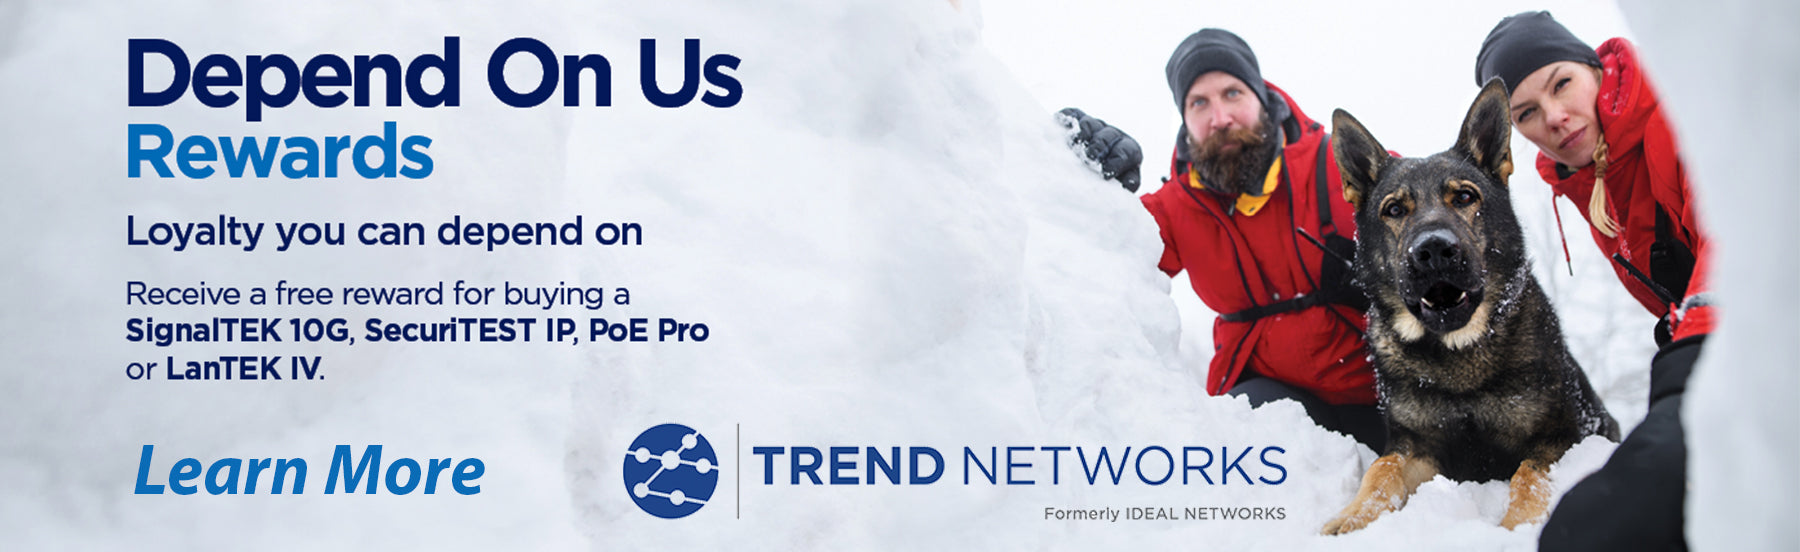 Depend On Us Rewards by Trend Networks